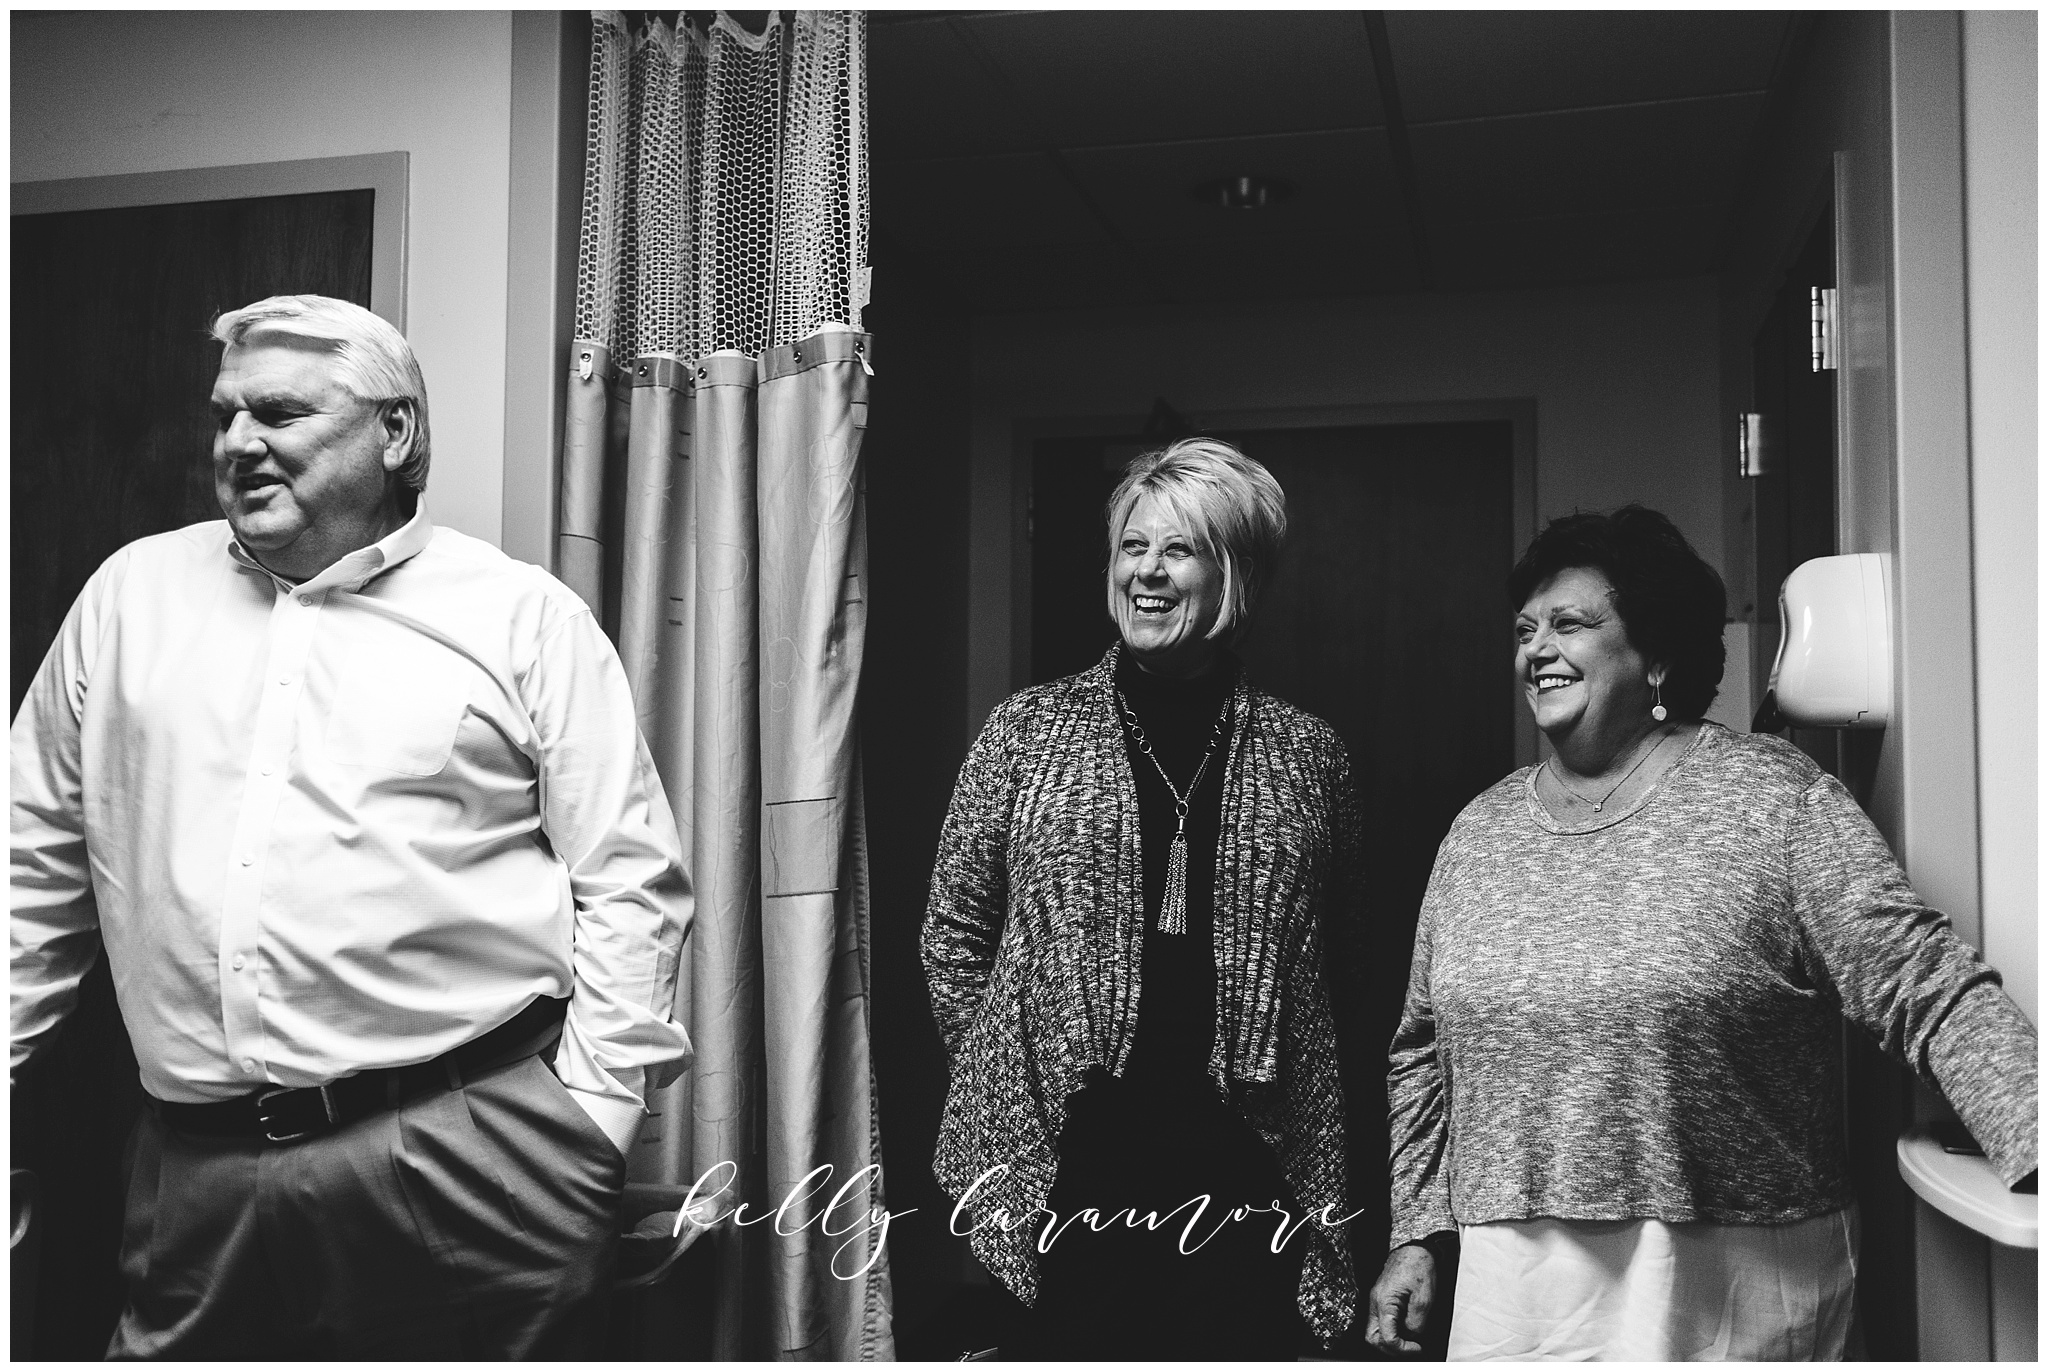 st louis birth story photographer, st louis family photographer, missouri baptist birth center-birth, delivery room, excited grandparents